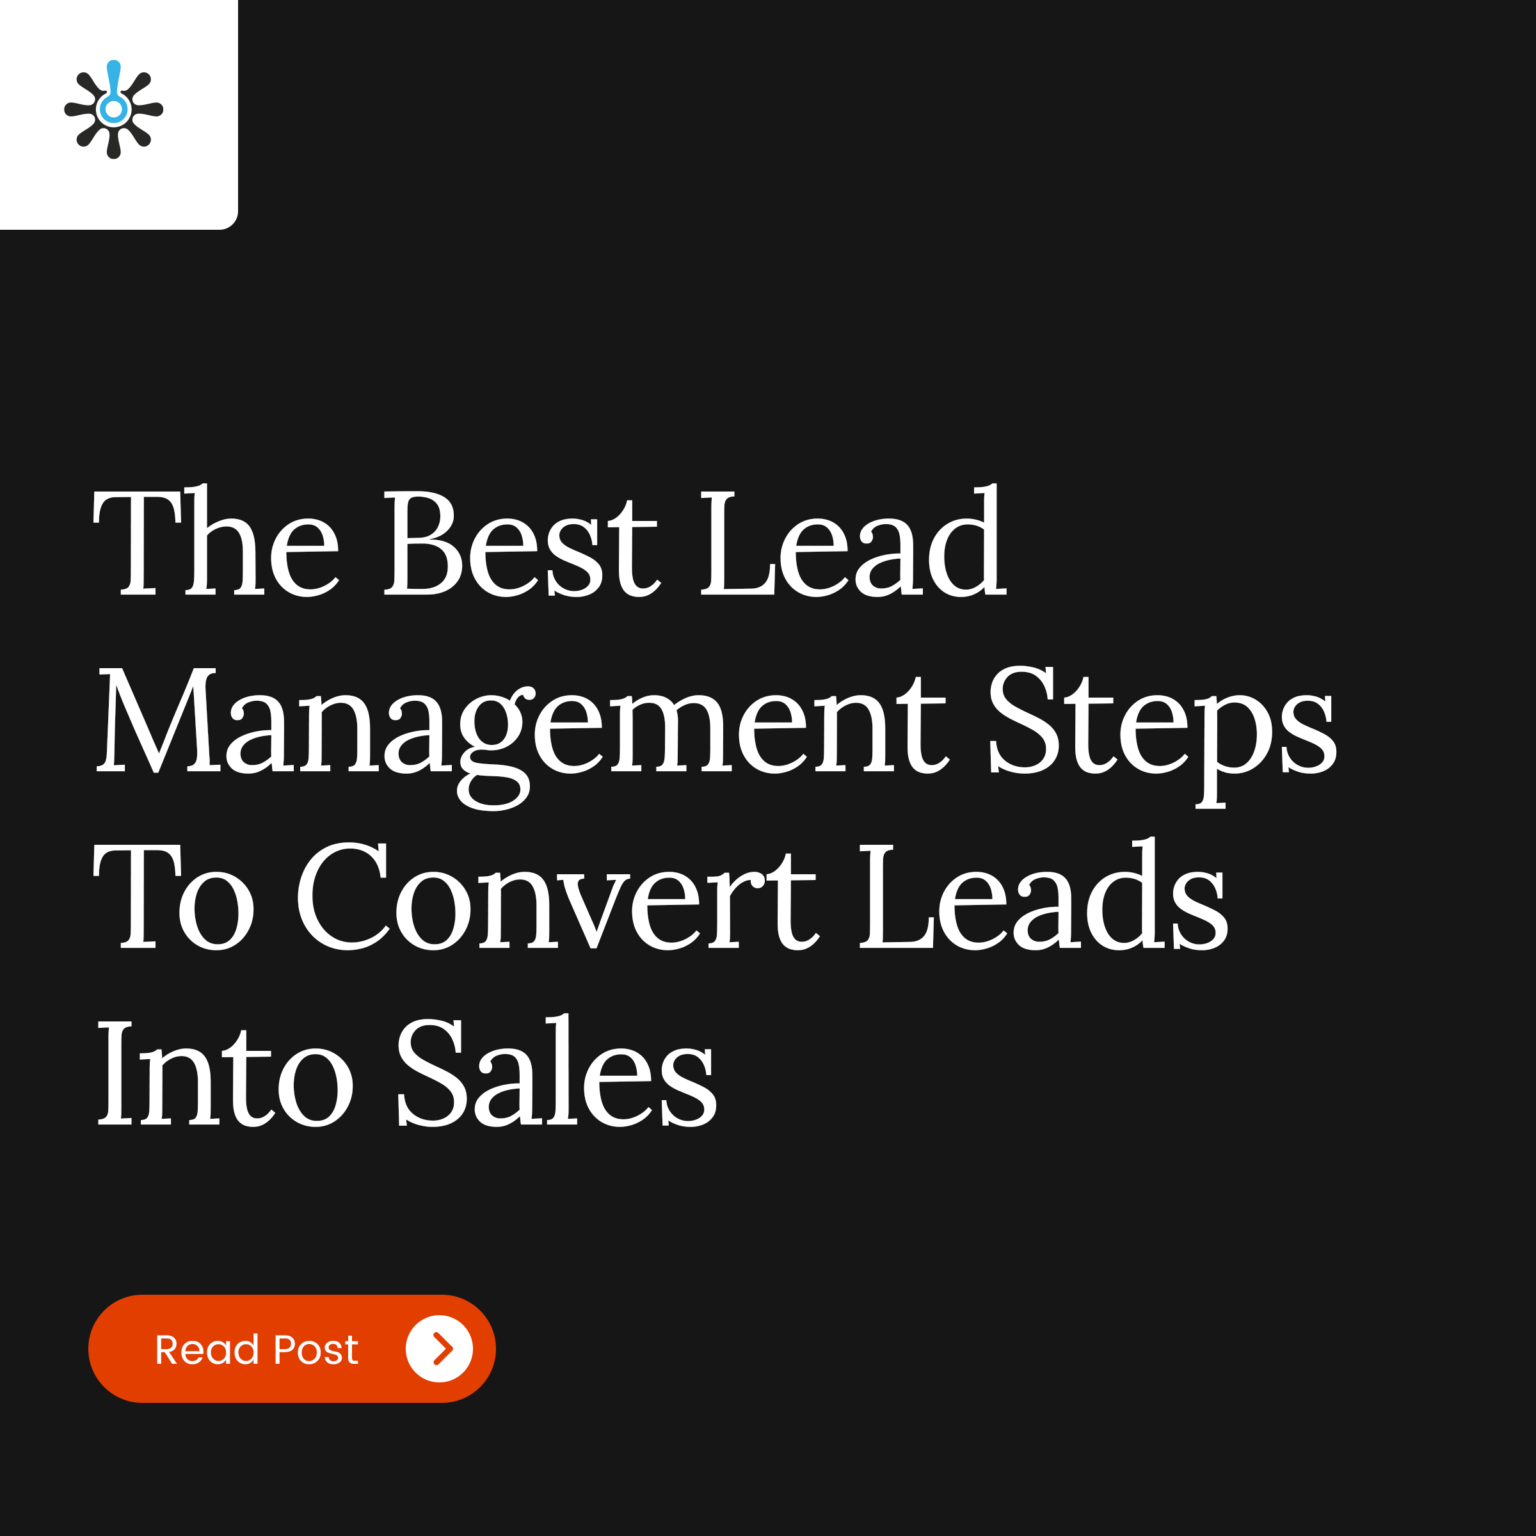 Title Page Reading "The Best Lead Management Steps To Convert Leads Into Sales"